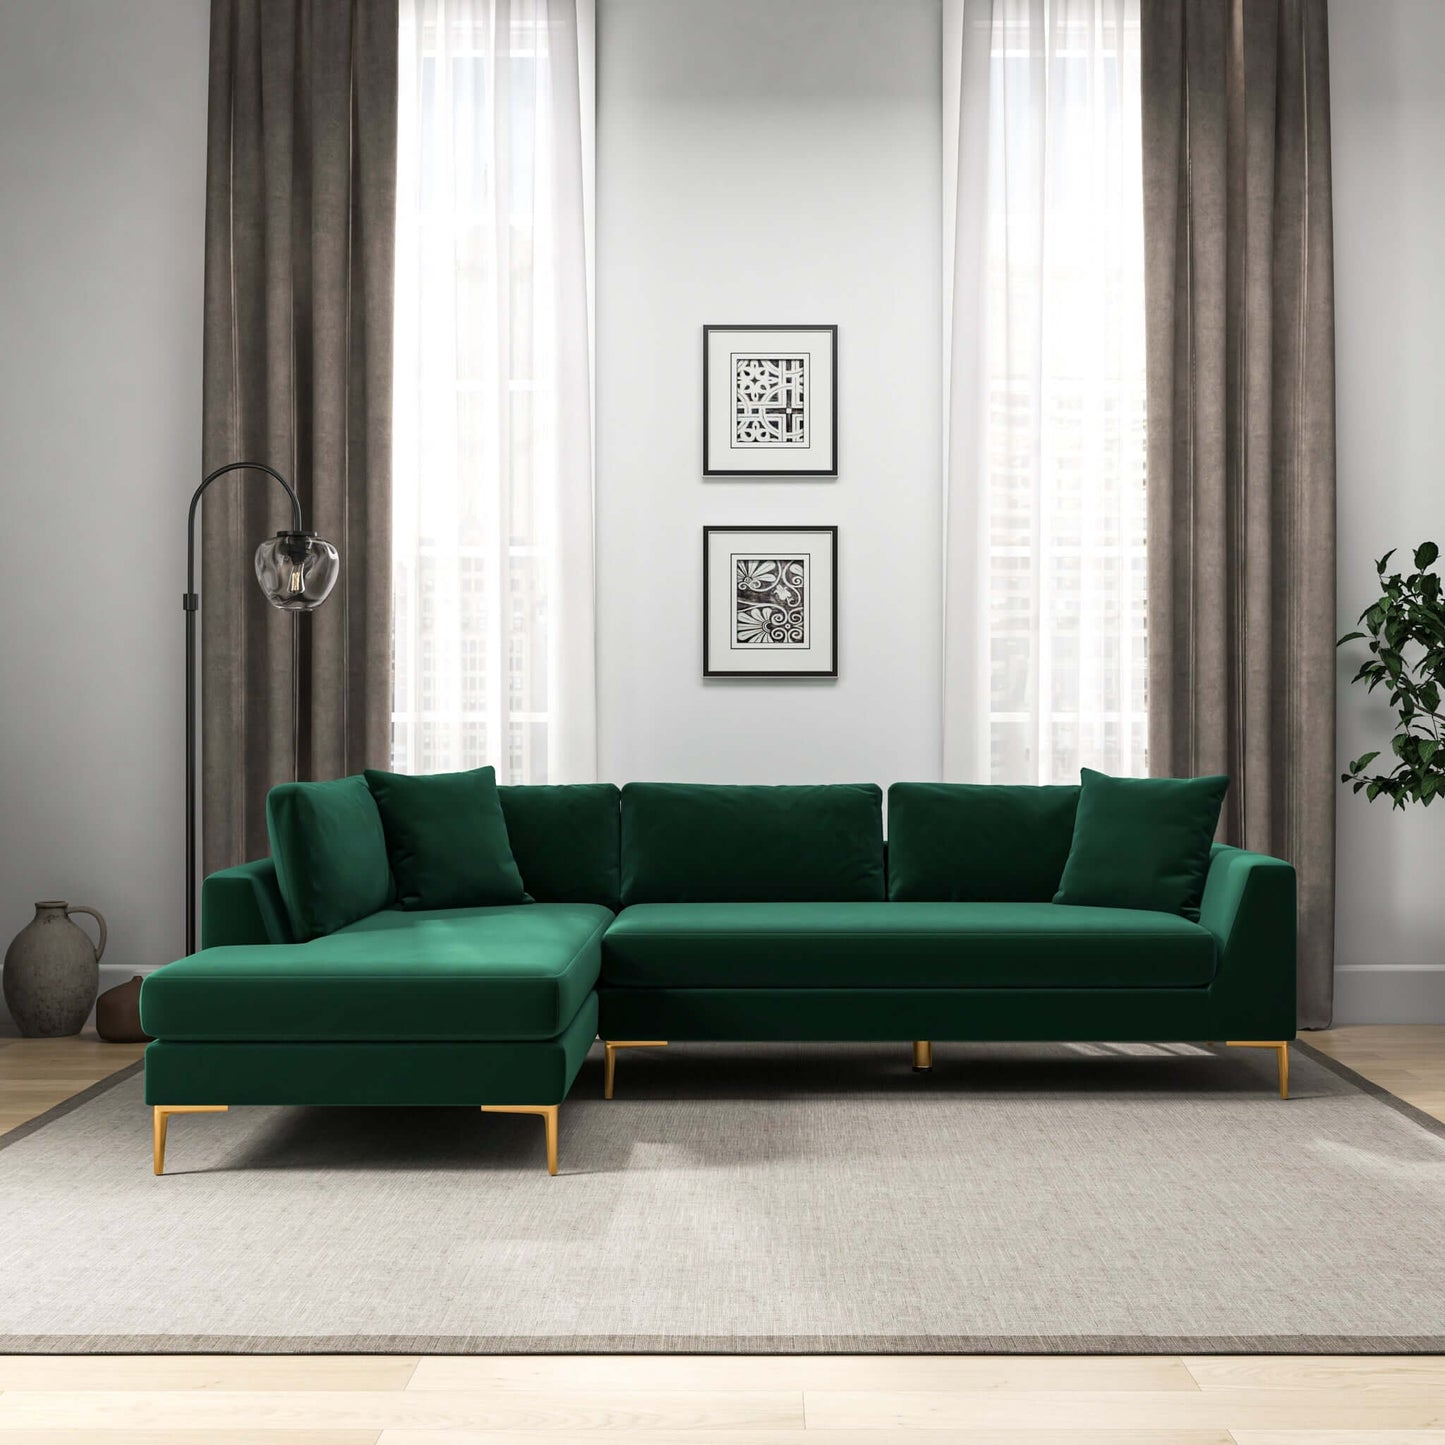 Ashcroft Furniture Co Sectional Sofas Mano Mid-Century Modern L-Shaped Velvet Sectional Sofa in Green